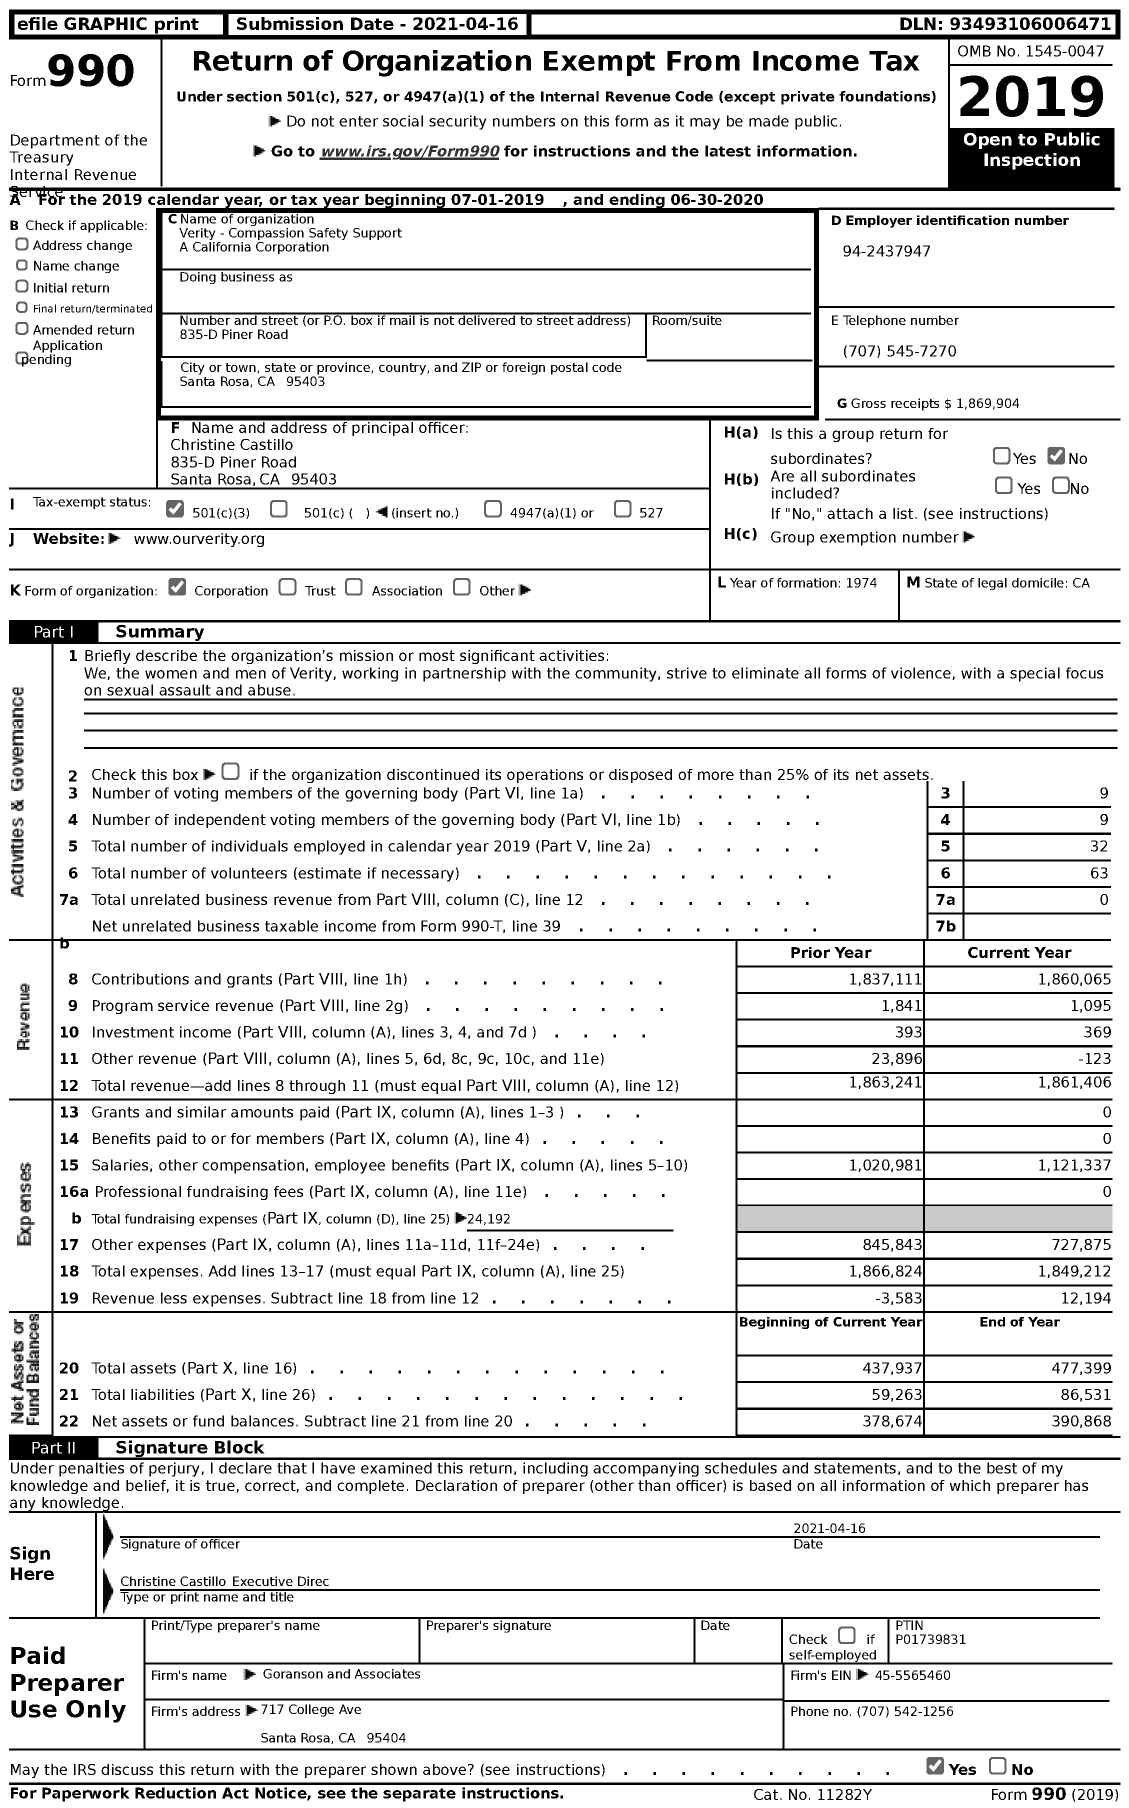 Image of first page of 2019 Form 990 for Verity - Compassion Safety Support A California Corporation